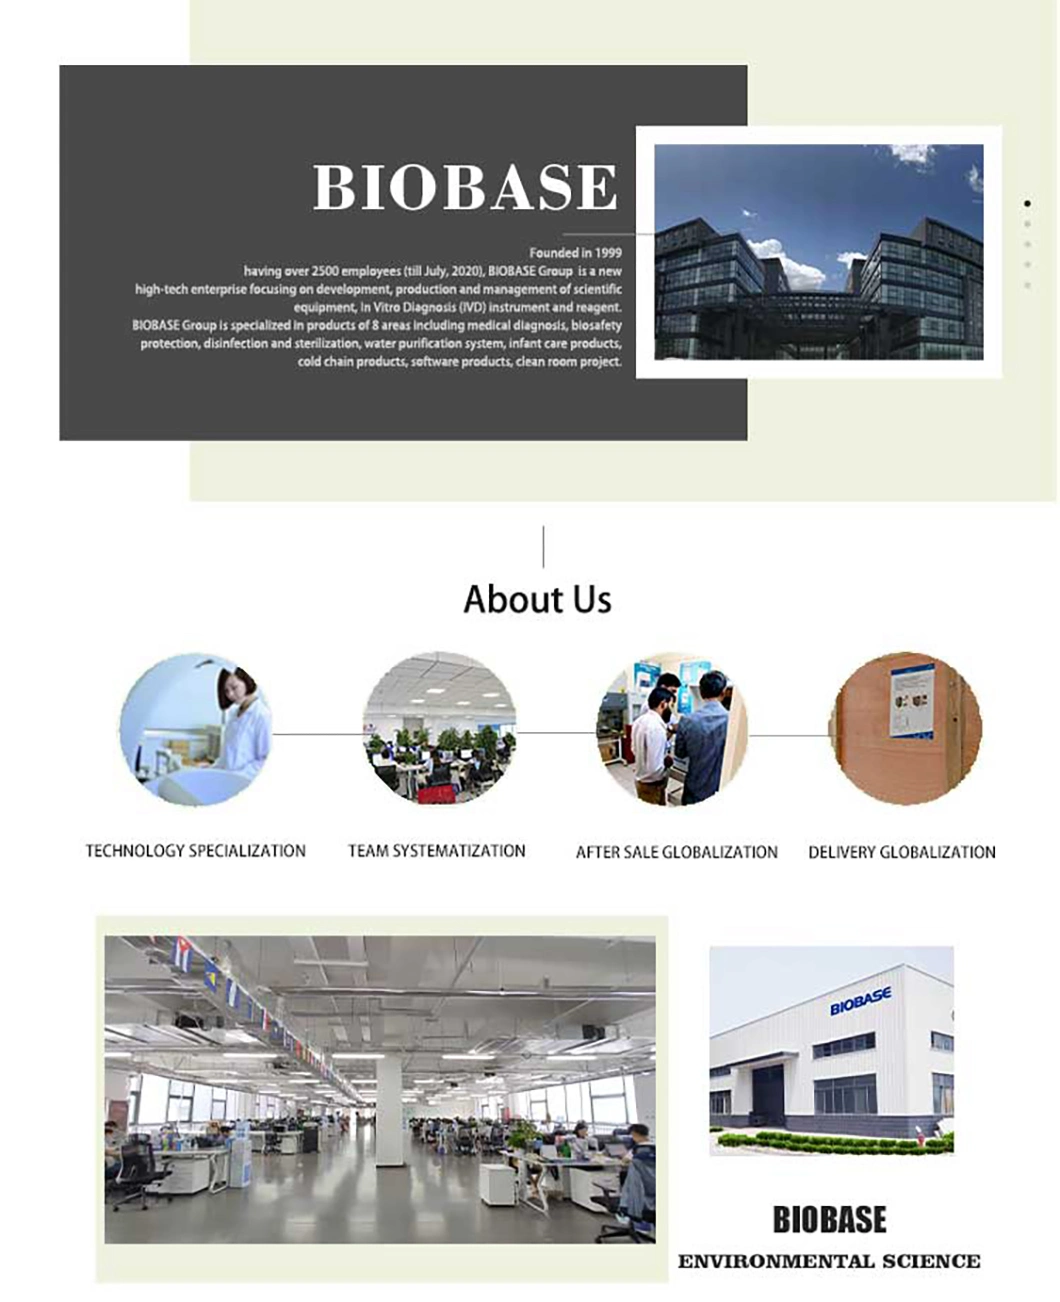 Biobase Rcr Lab Nucleic Acid 32 Sample Extraction System